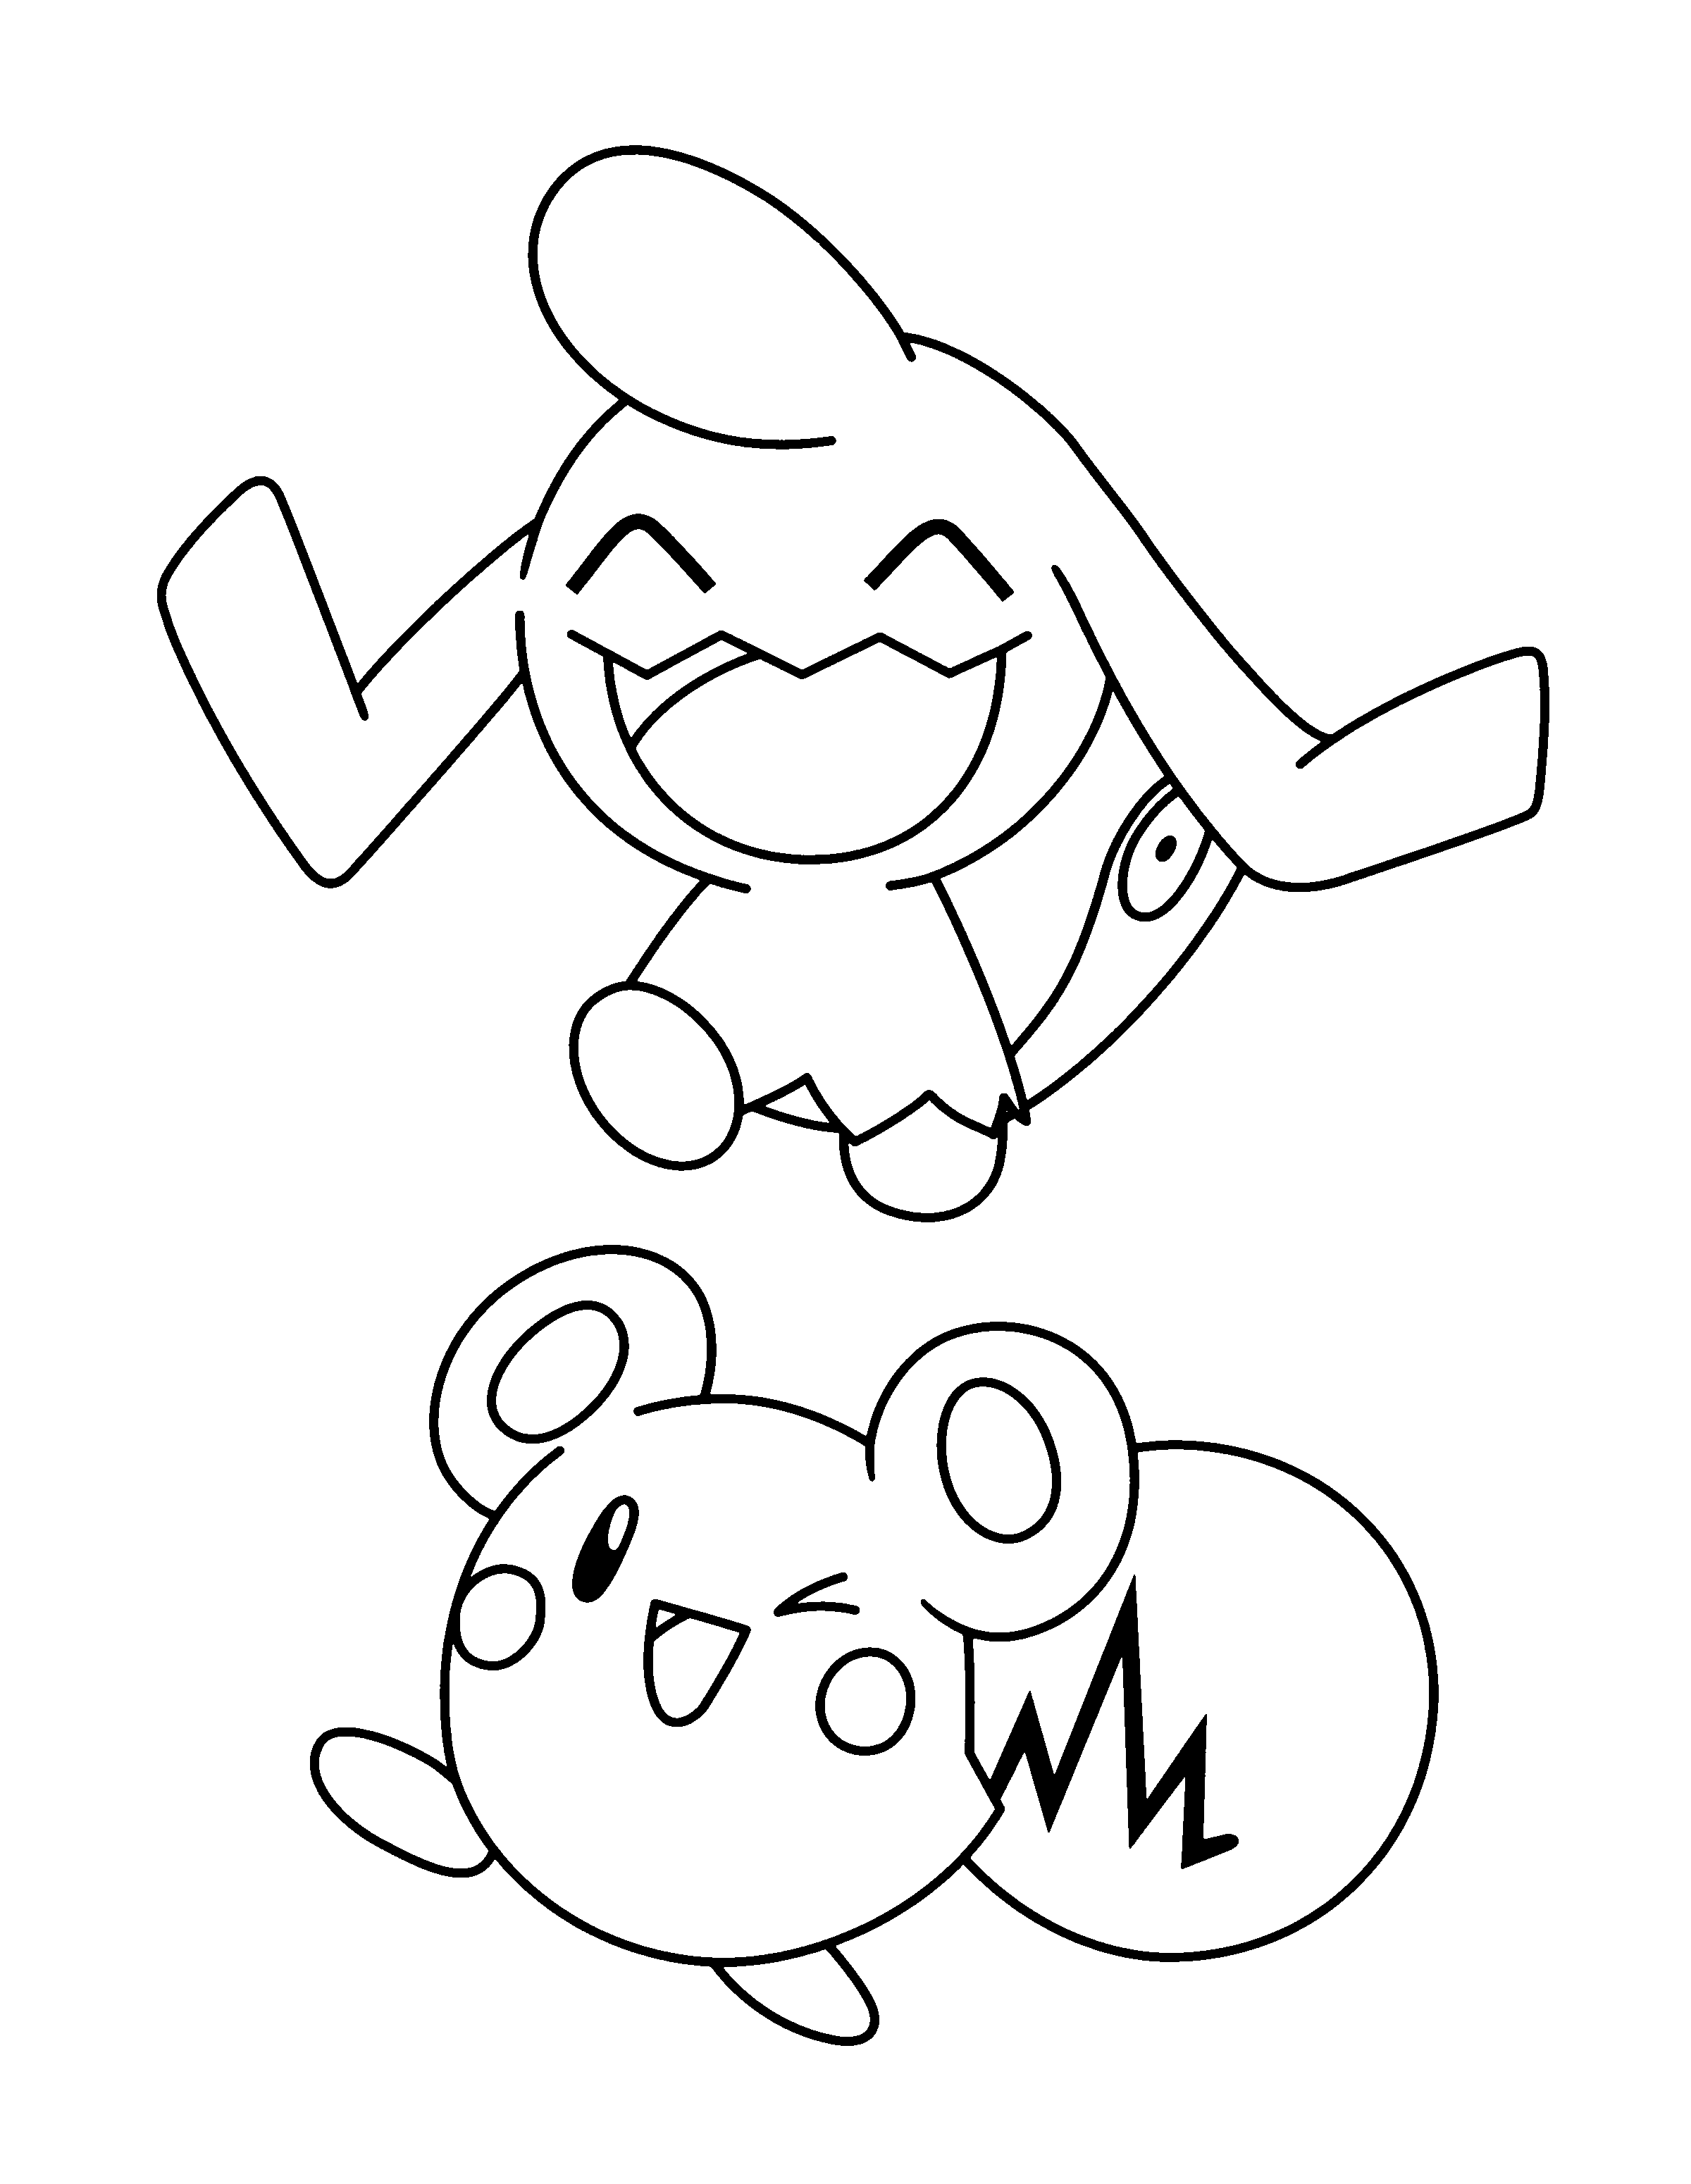 Pokemon advanced coloring pages